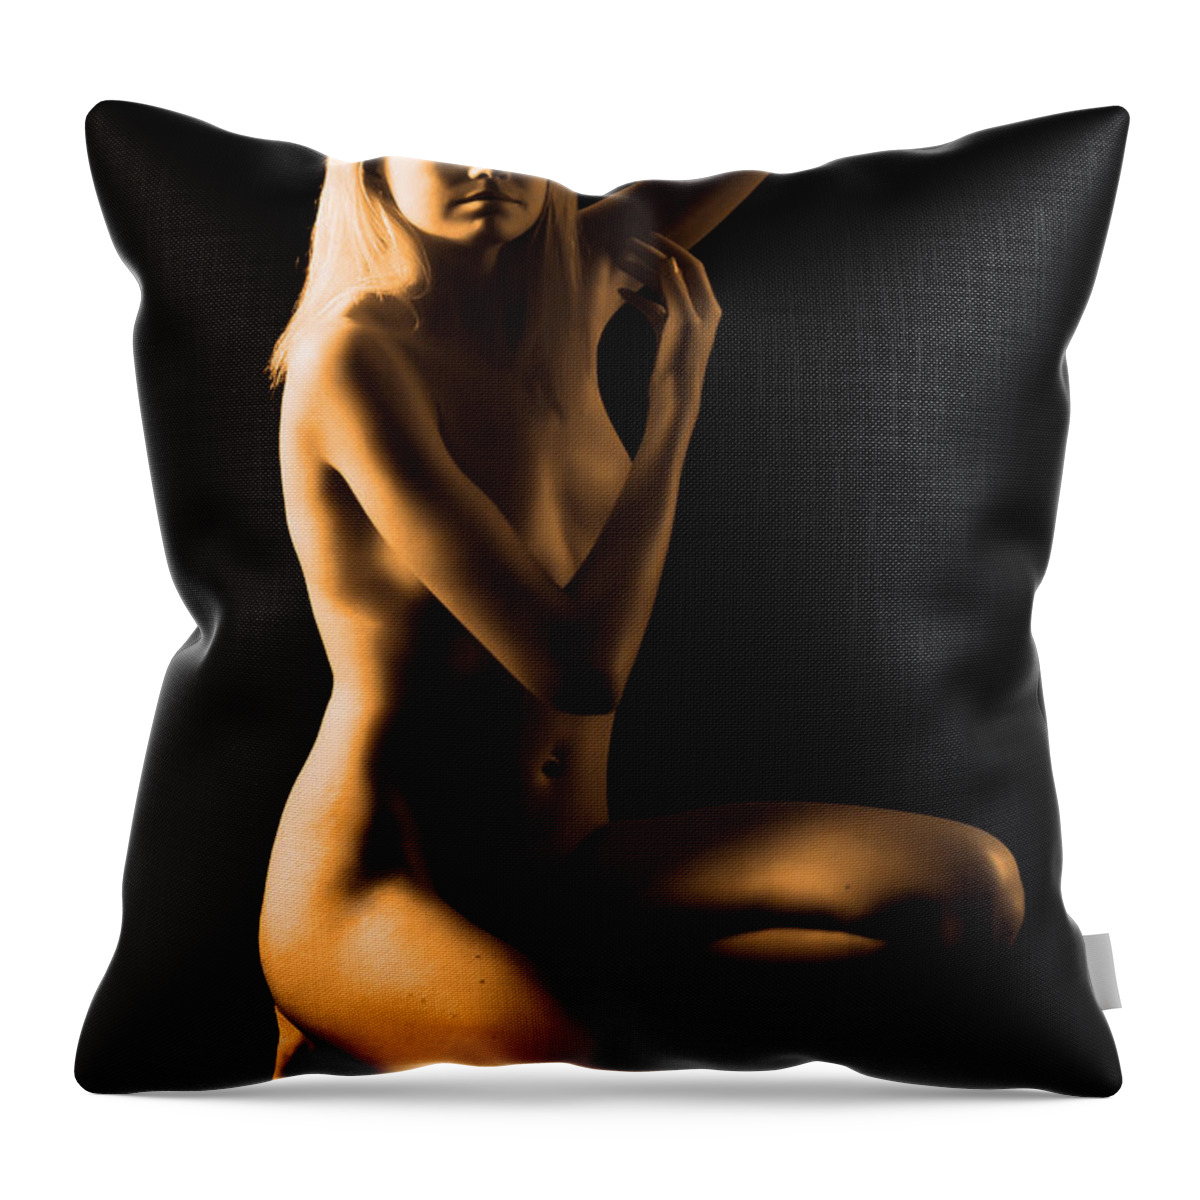 Artistic Photographs Throw Pillow featuring the photograph Young Maiden by Robert WK Clark